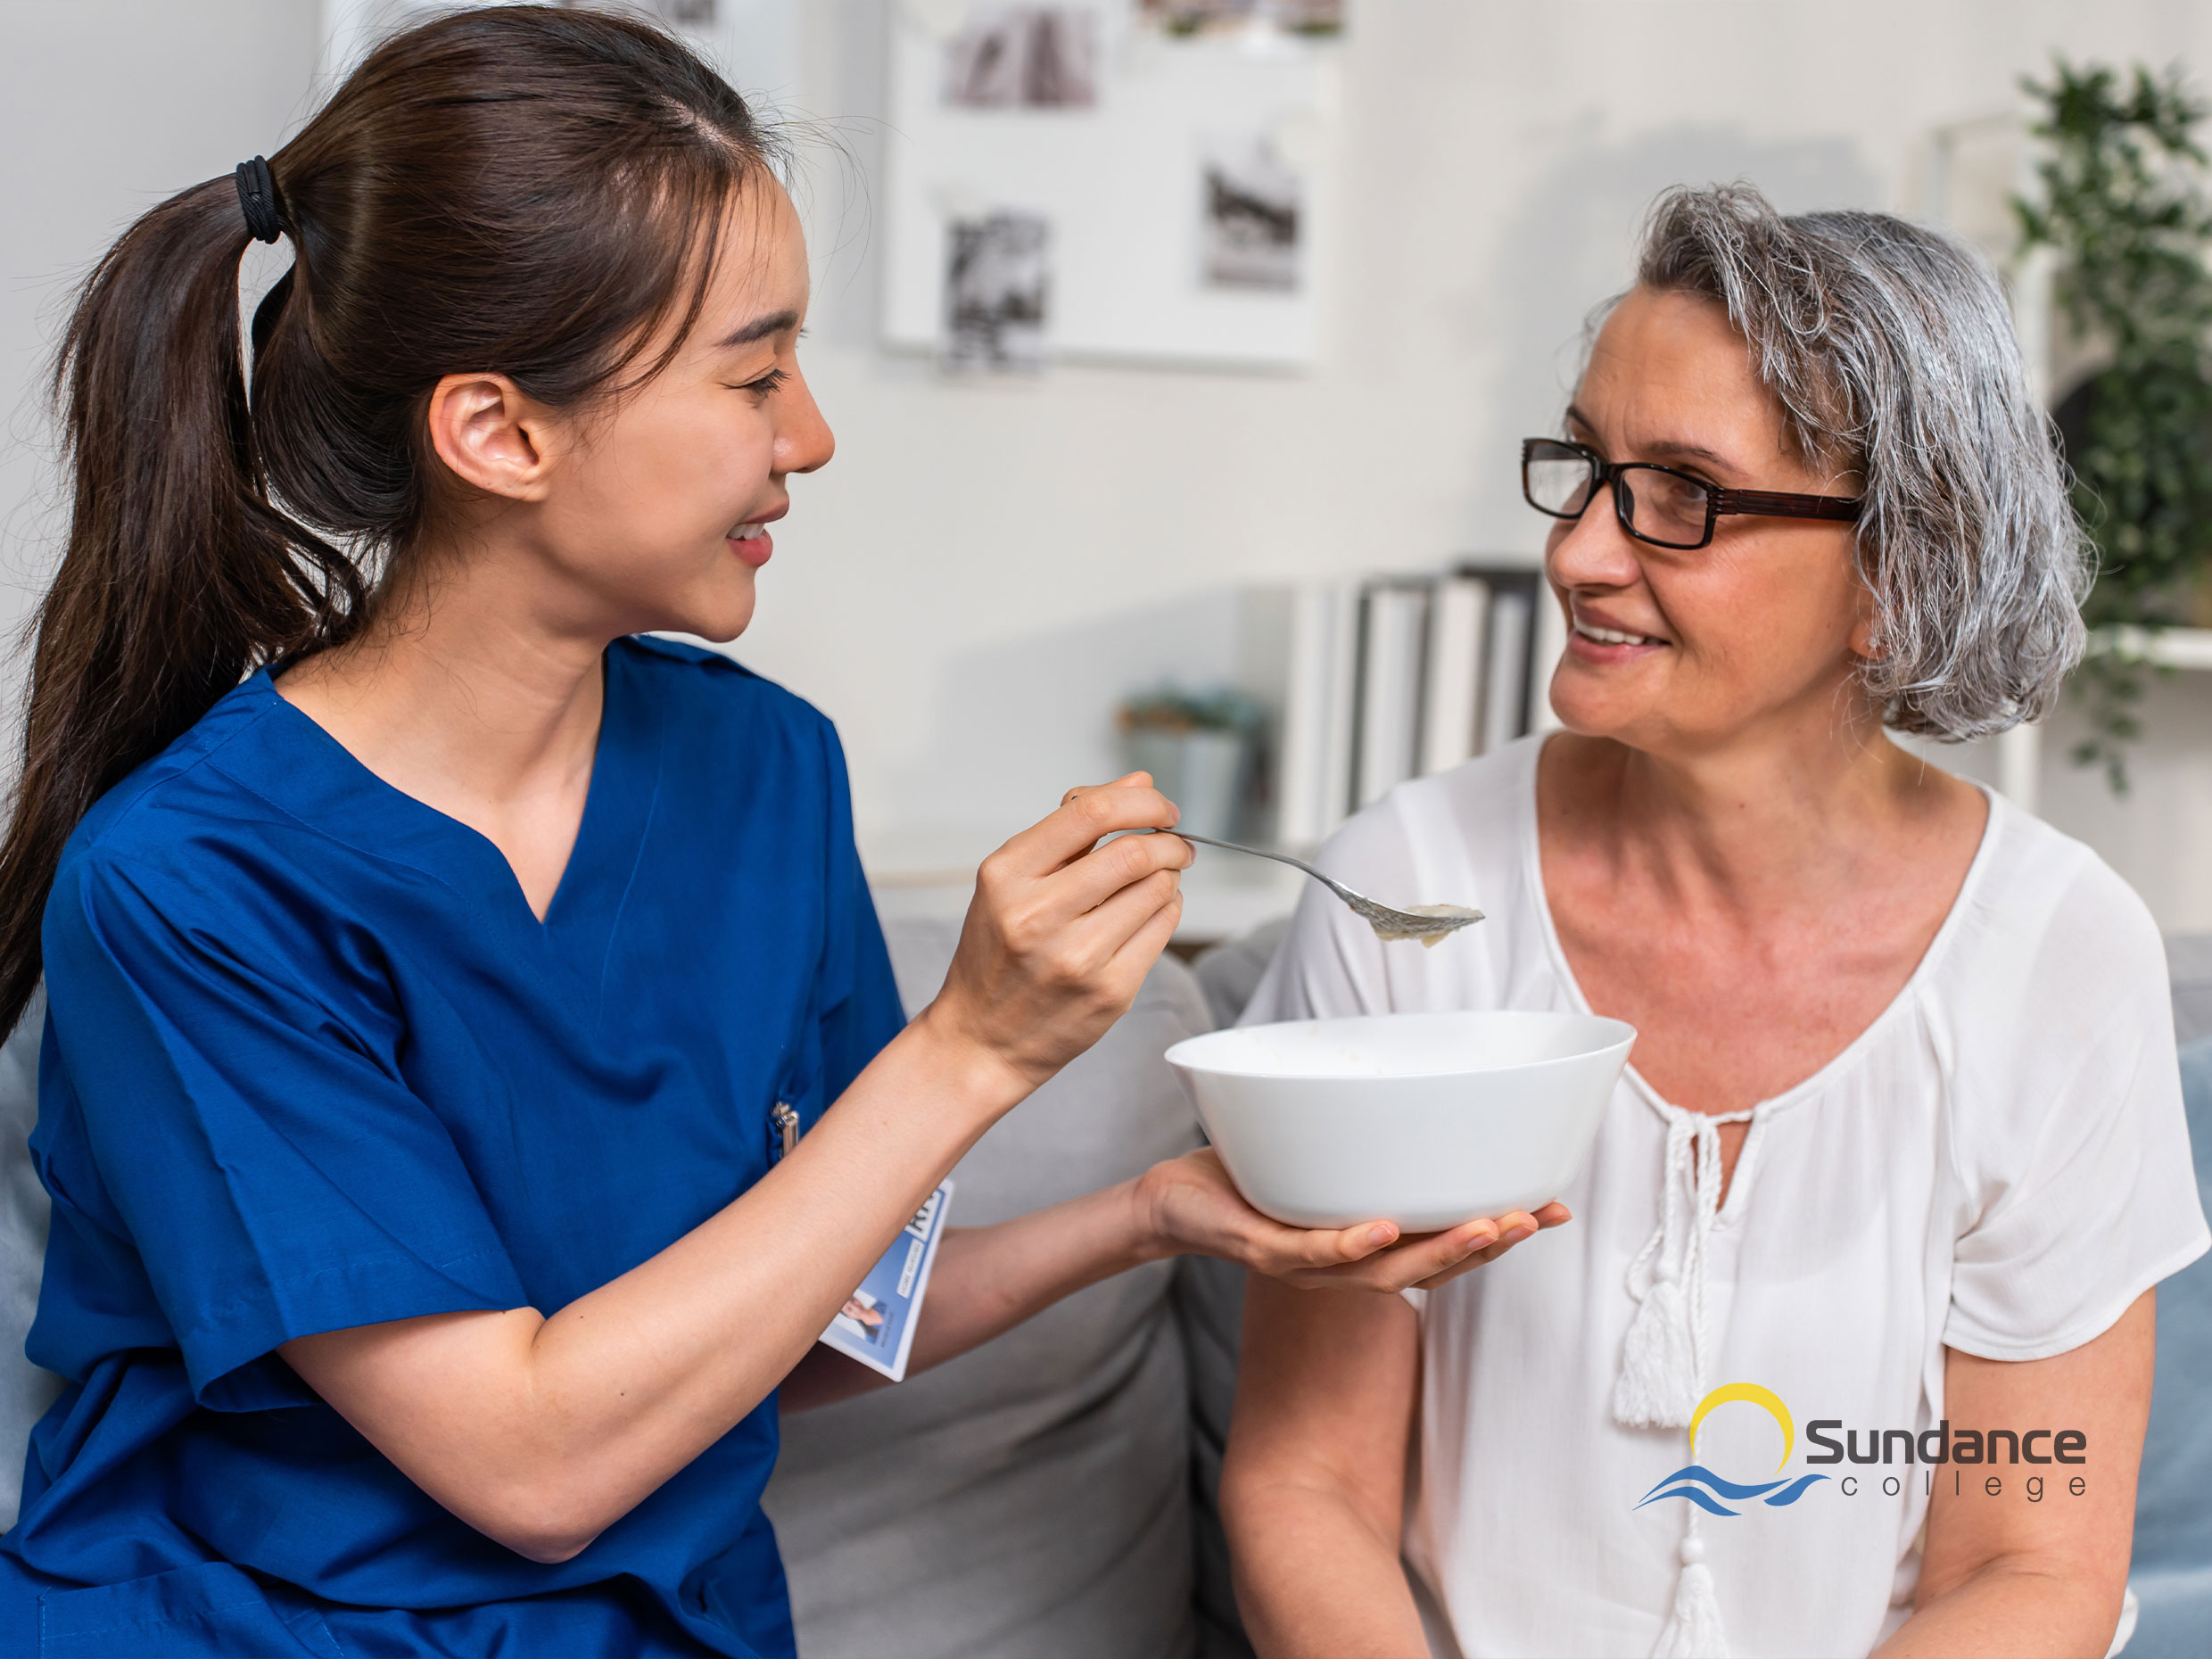 A personal support worker feeding patient at a group home